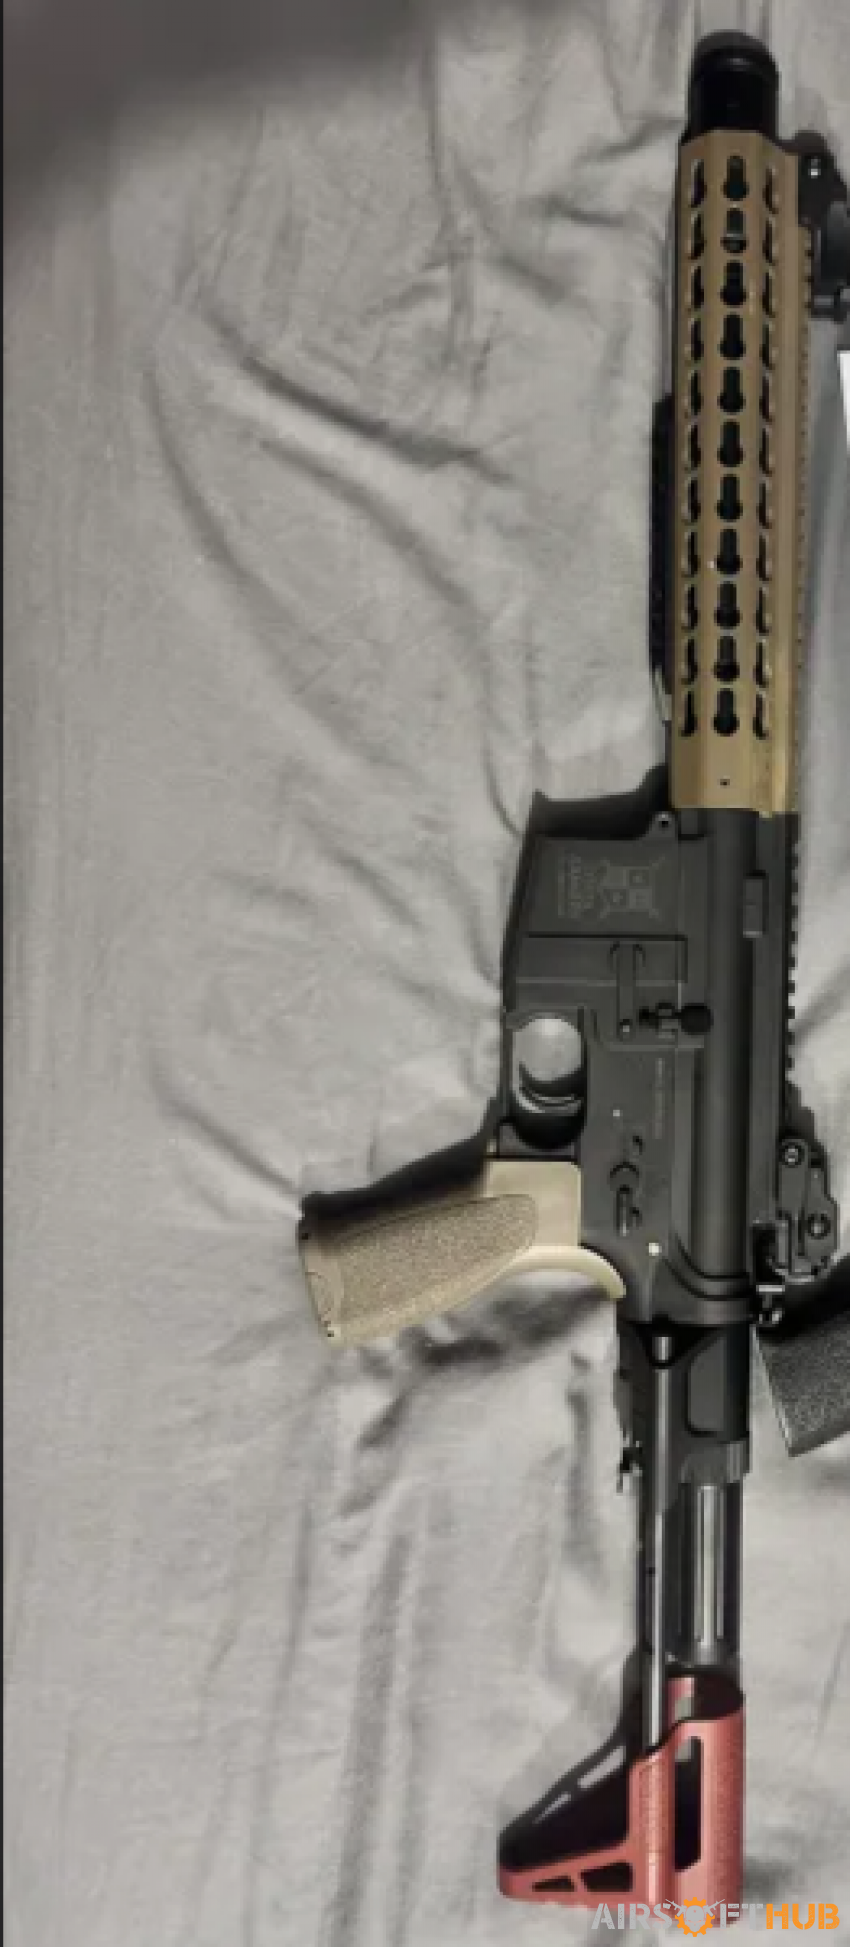 Delta armory m4 (upgraded) - Used airsoft equipment